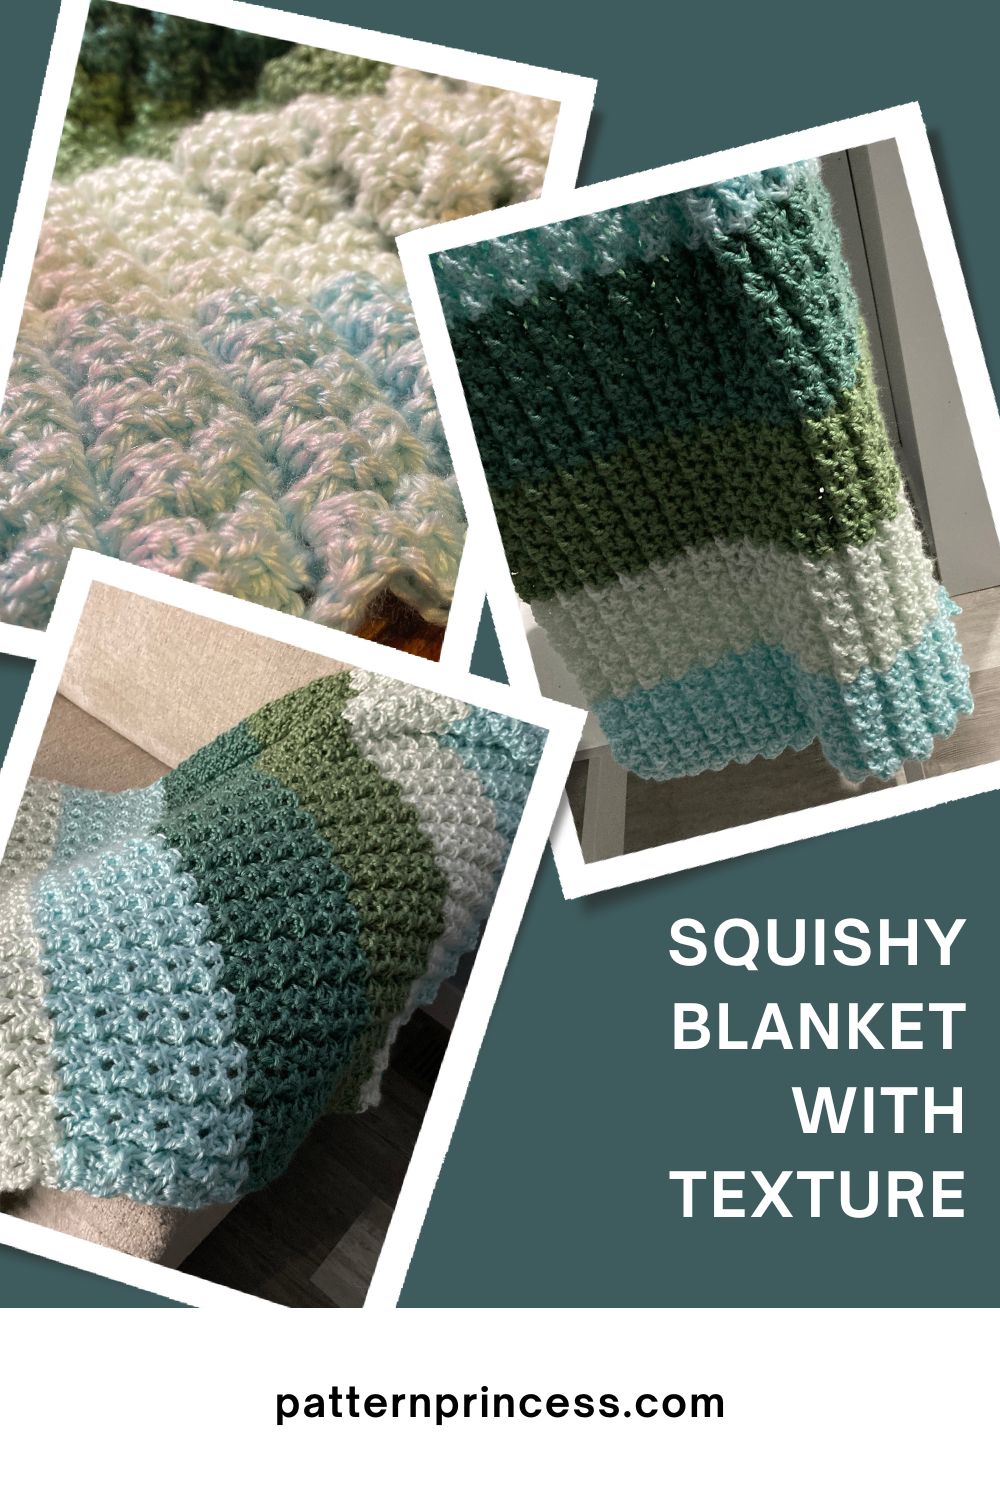 Squishy Blanket with Texture